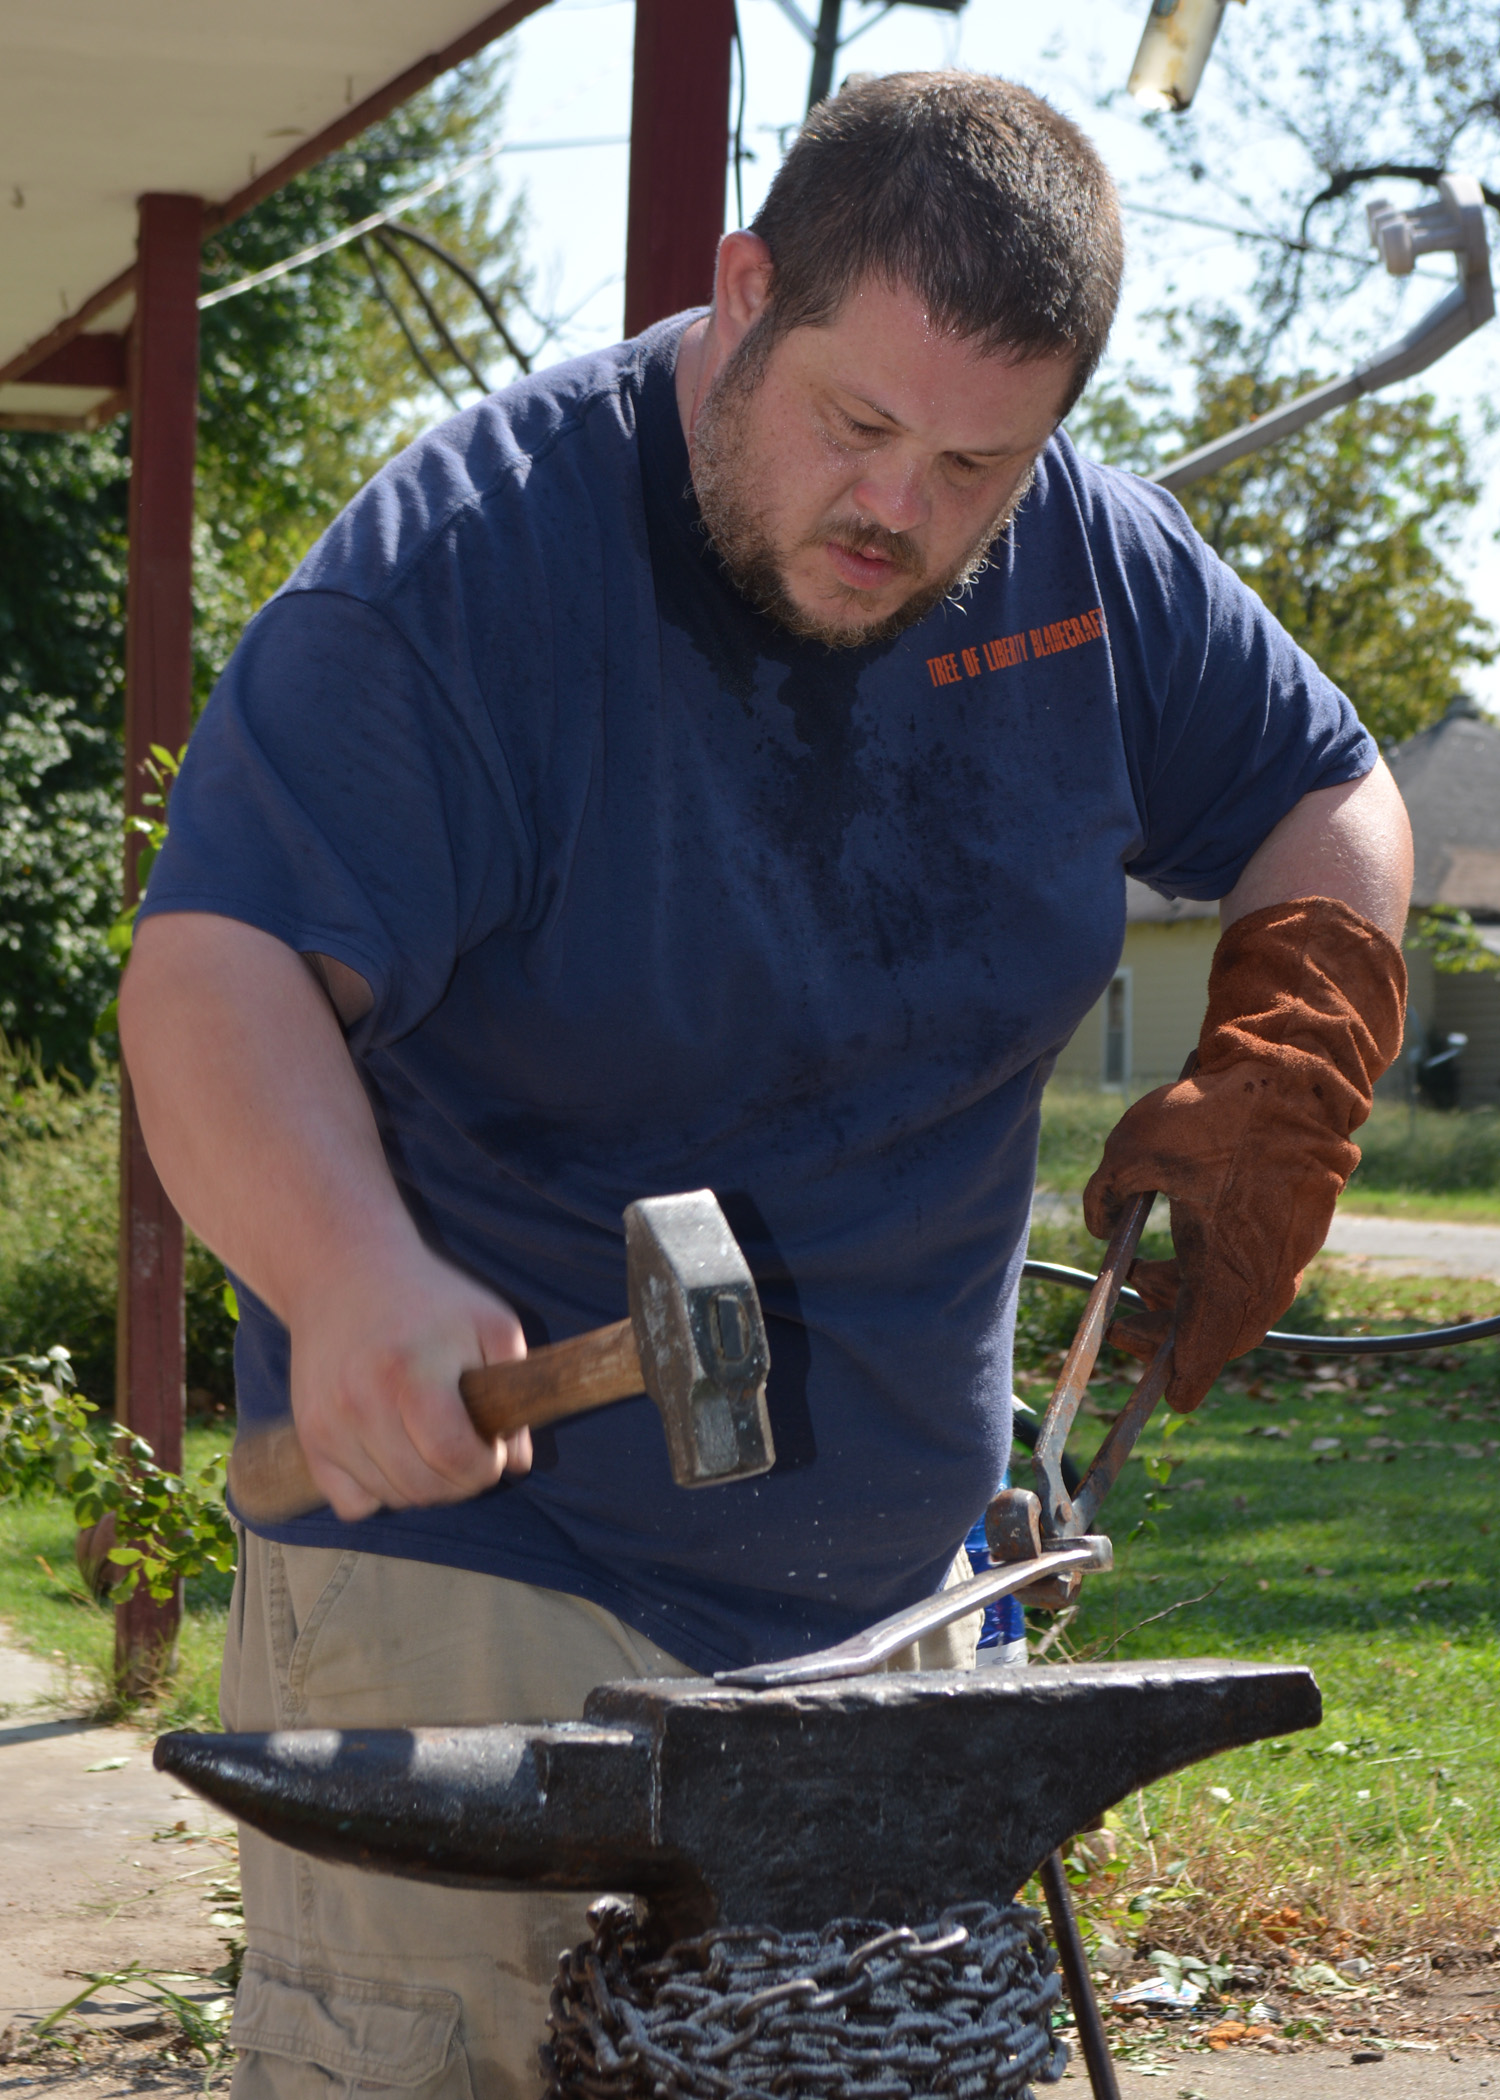 A man hammers a metal item on an anvil.